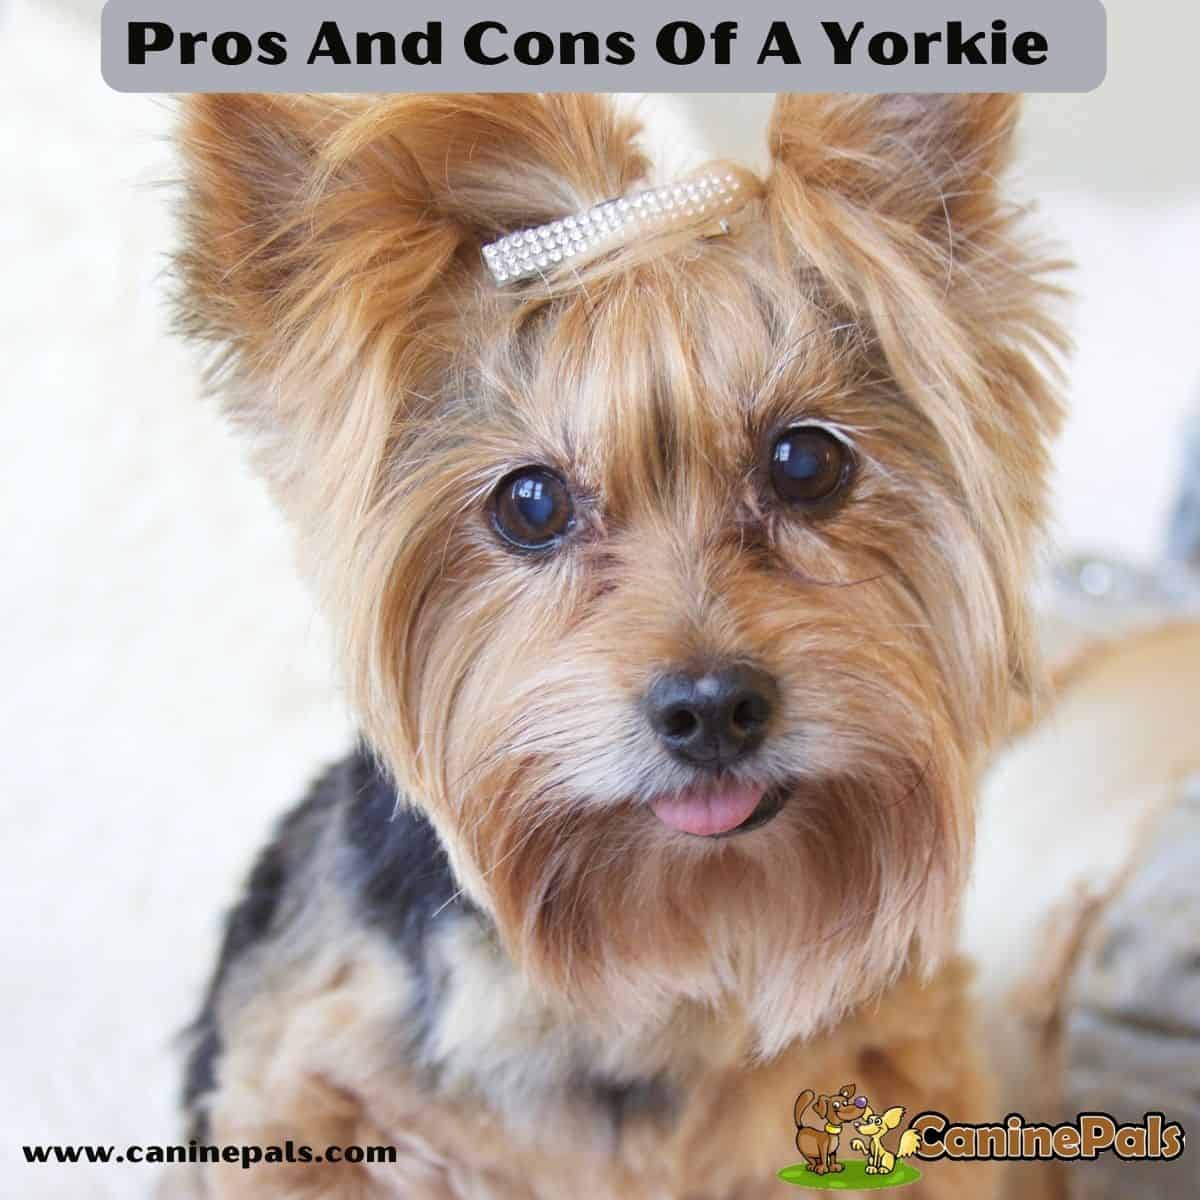 Pros And Cons of a Yorkie. 